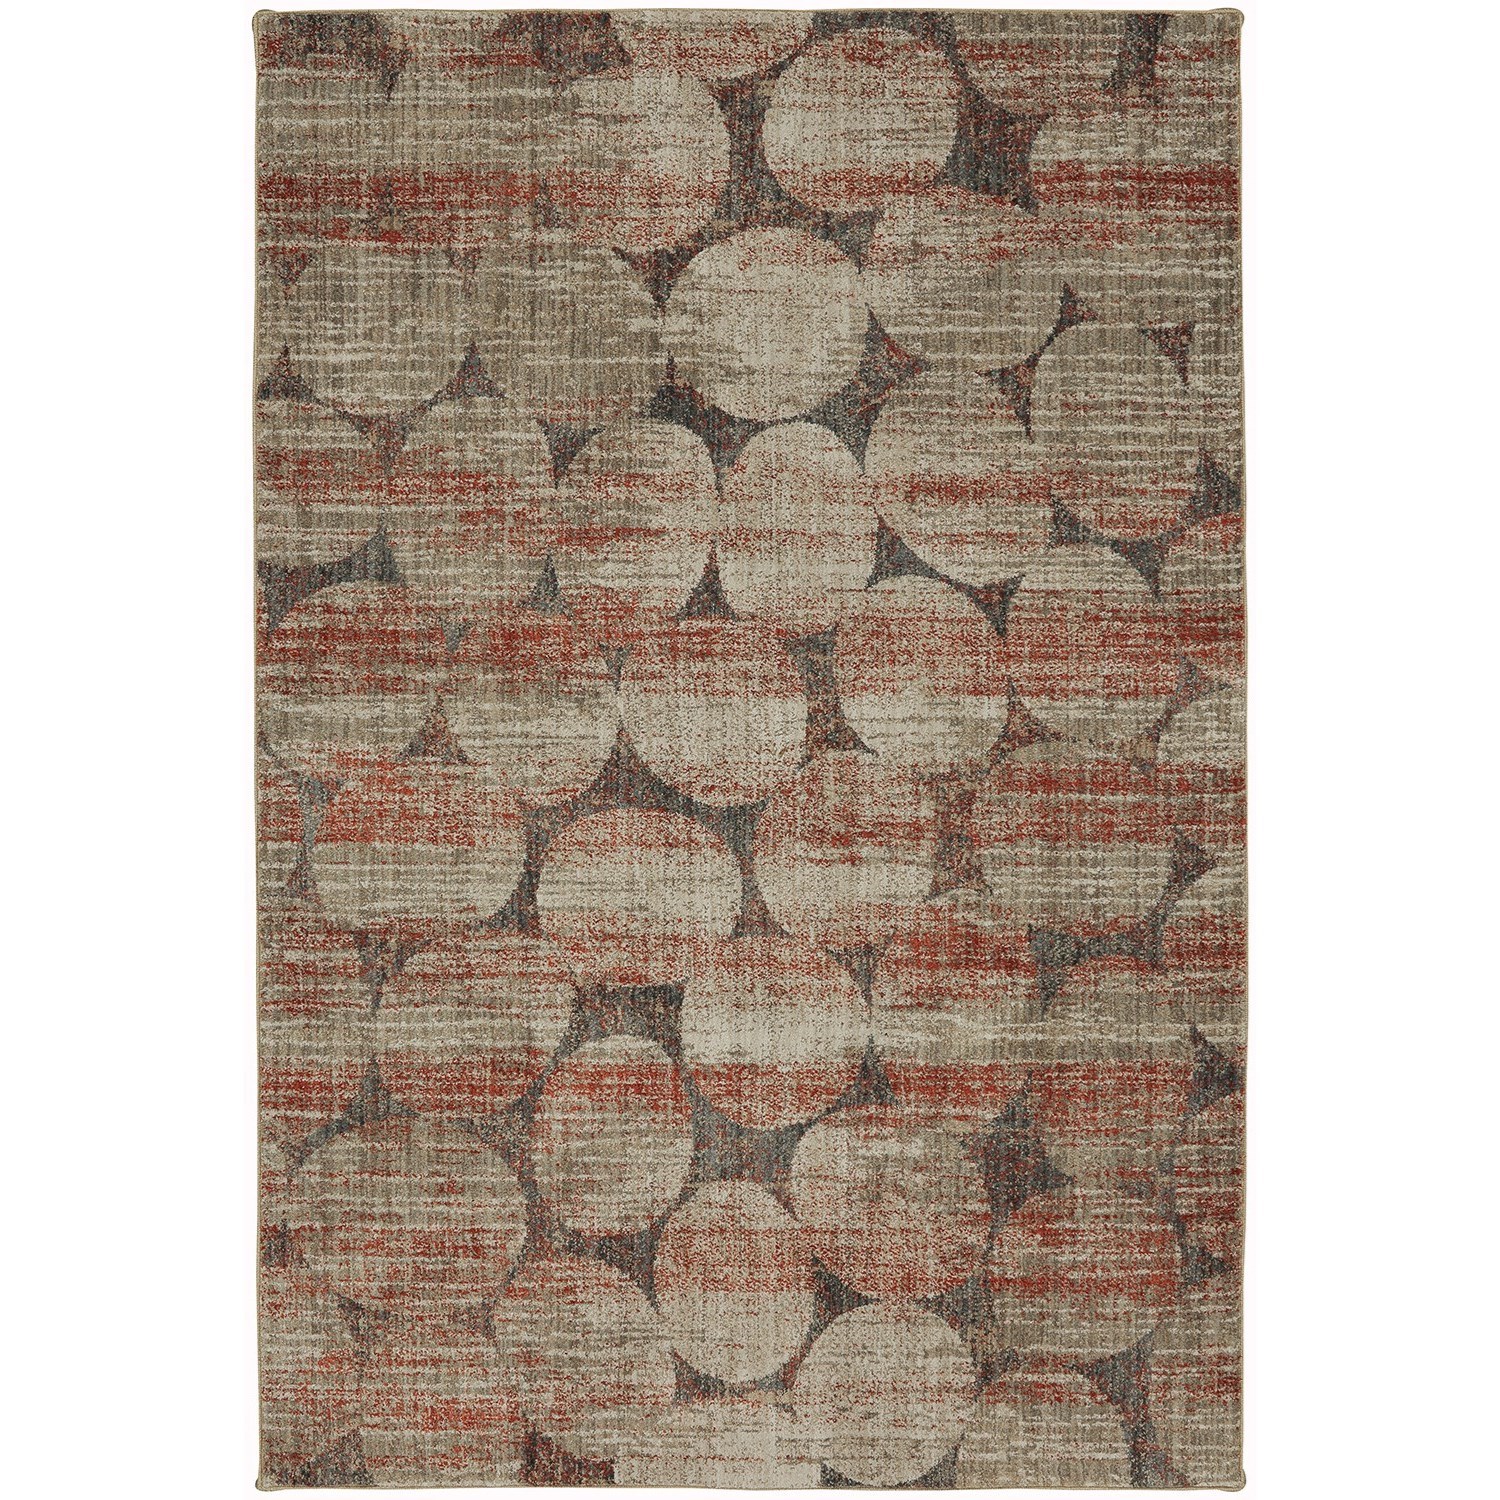 5' 3"x7' 10" Elipsis Ginger Area Rug